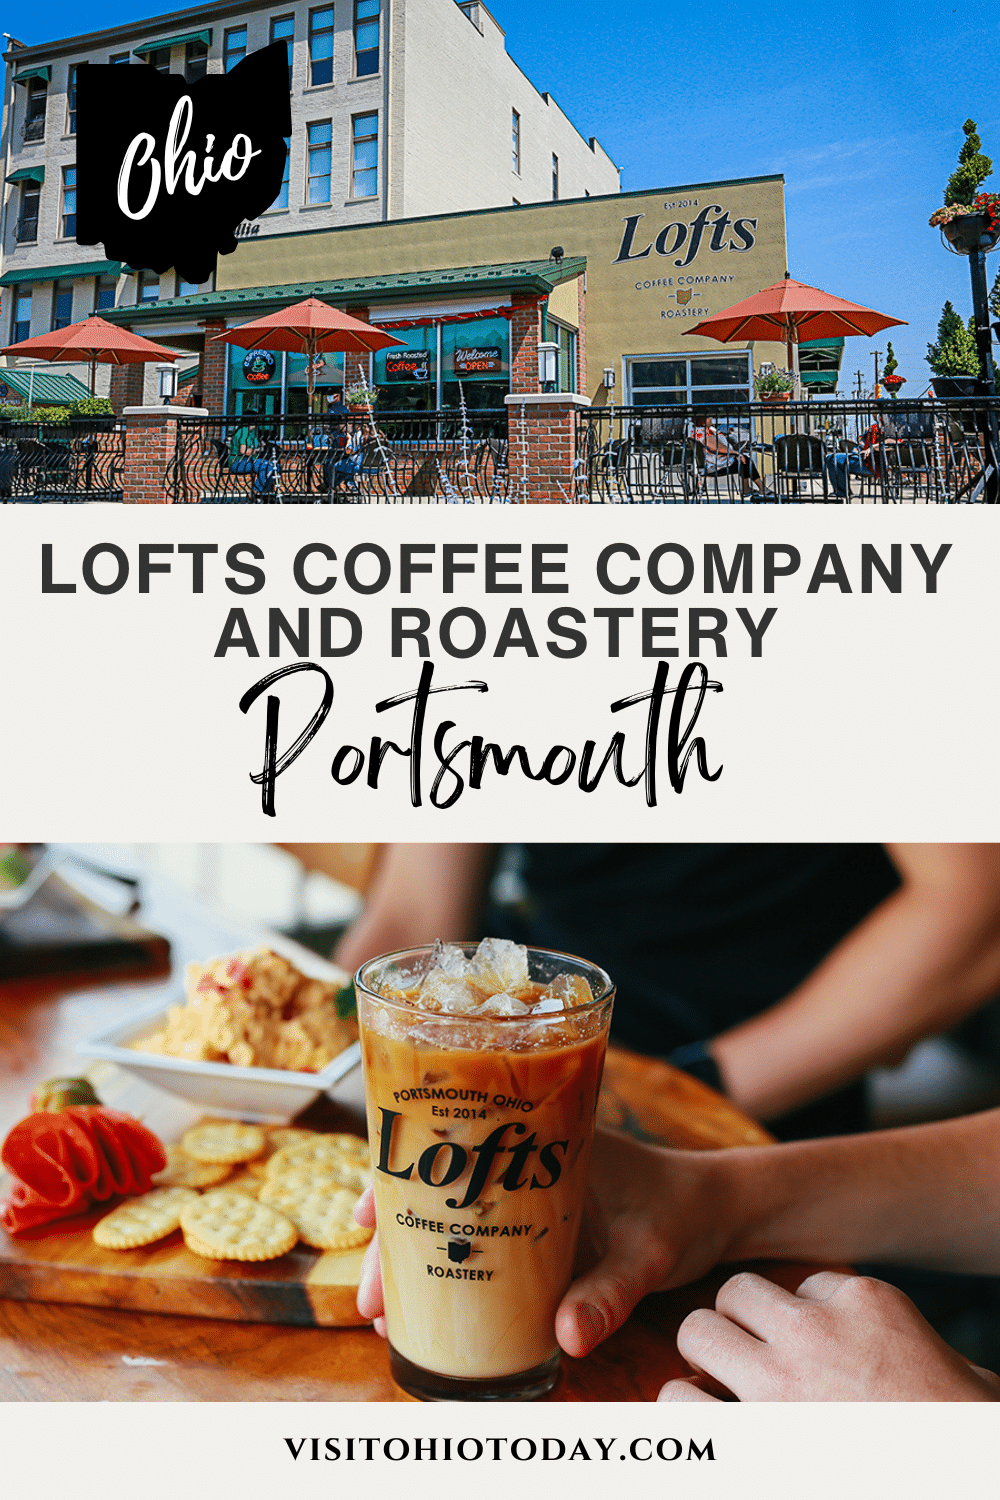 Lofts Coffee Company and Roastery roast their own coffees, have a full bakery, and serve food, wine, and cocktails.  Recently they also started making their own K-cups, which are filled with fresh roasted and fresh ground coffee.  Their coffee pods are 100% recyclable and filled to order.